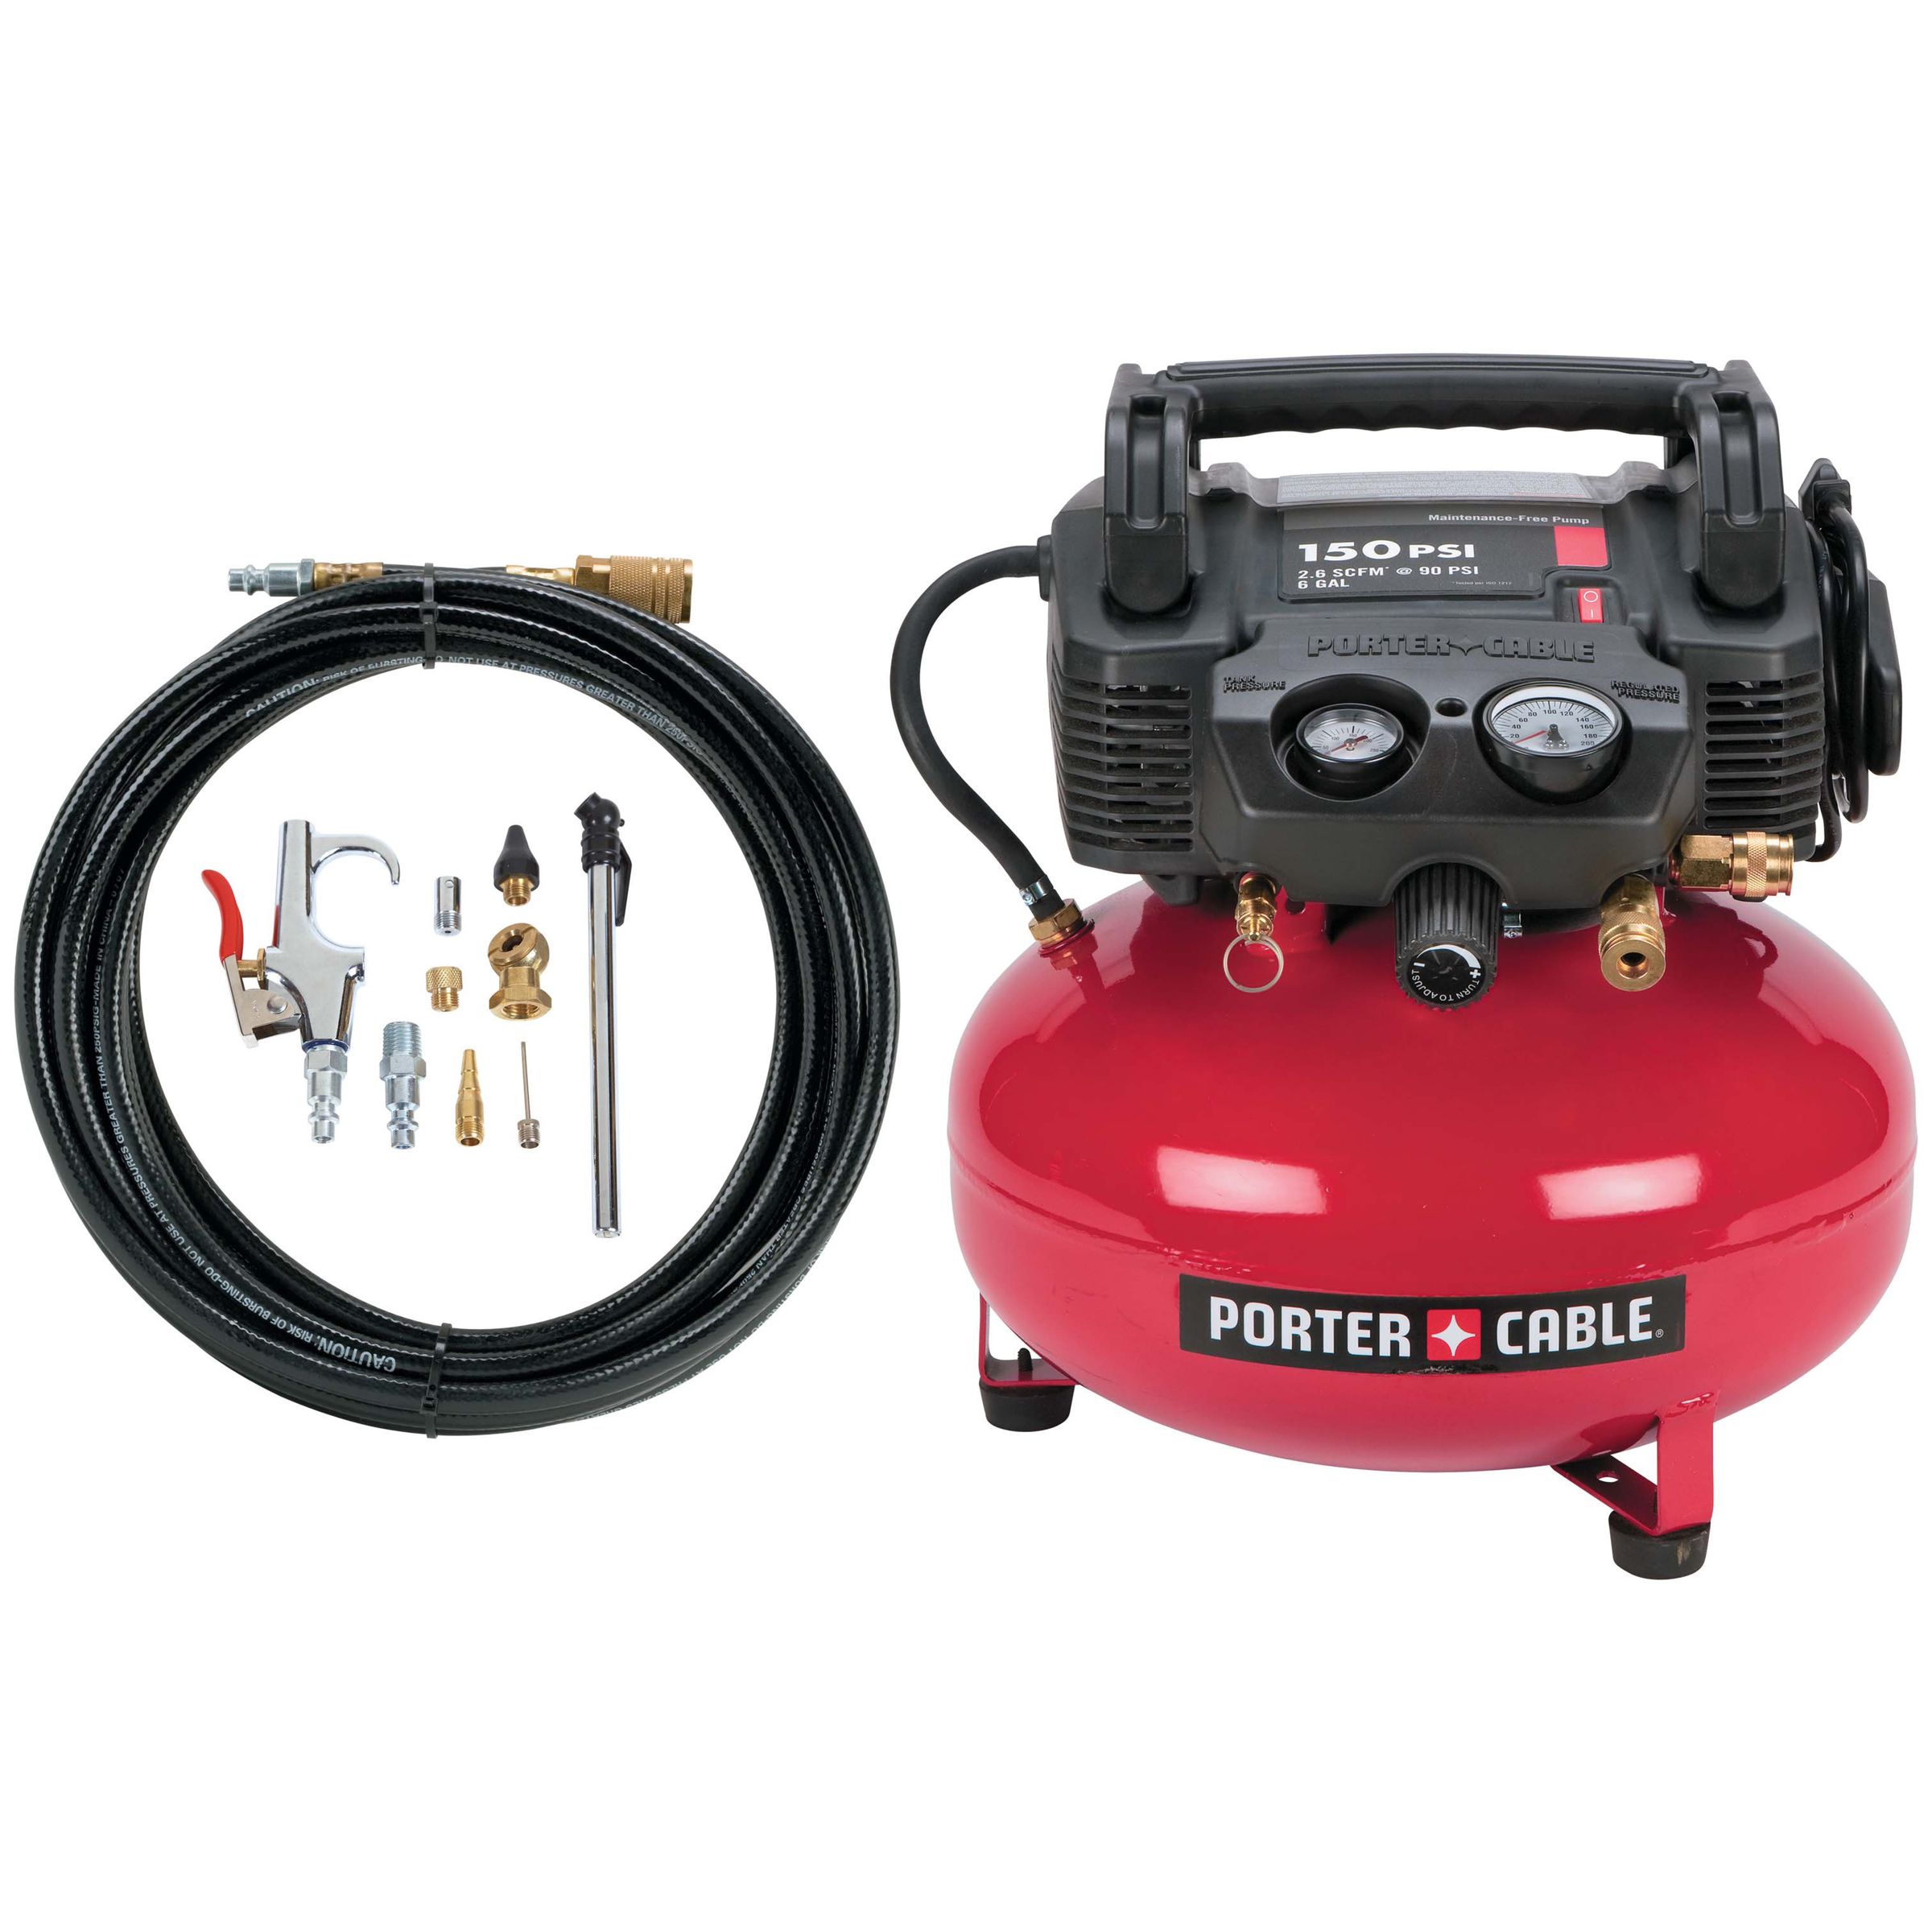 Porter-Cable 6-Gallon 0.8 HP Oil-Free UMC Pancake Compressor with 13-Piece Accessory Kit